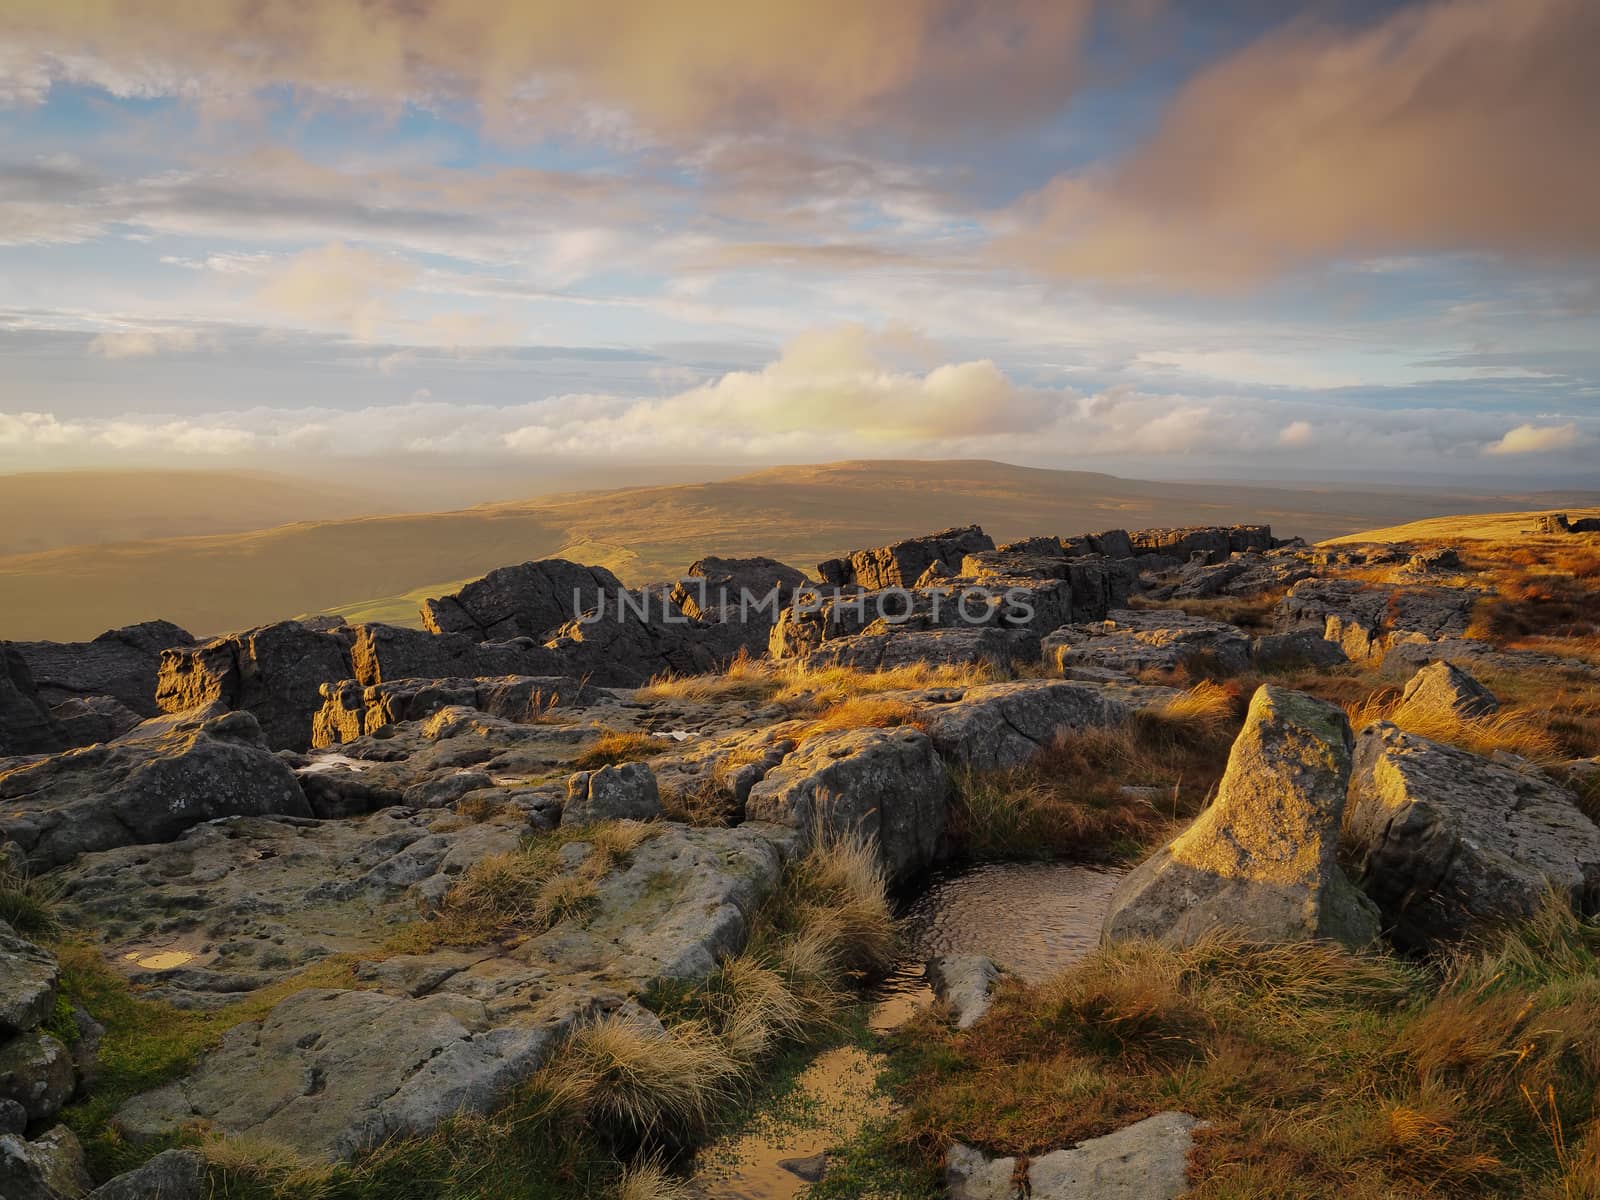 Sunset from the rocky outcrop at the top of Great Whernside overlooking Wharfedale, Yorkshire Dales, UK